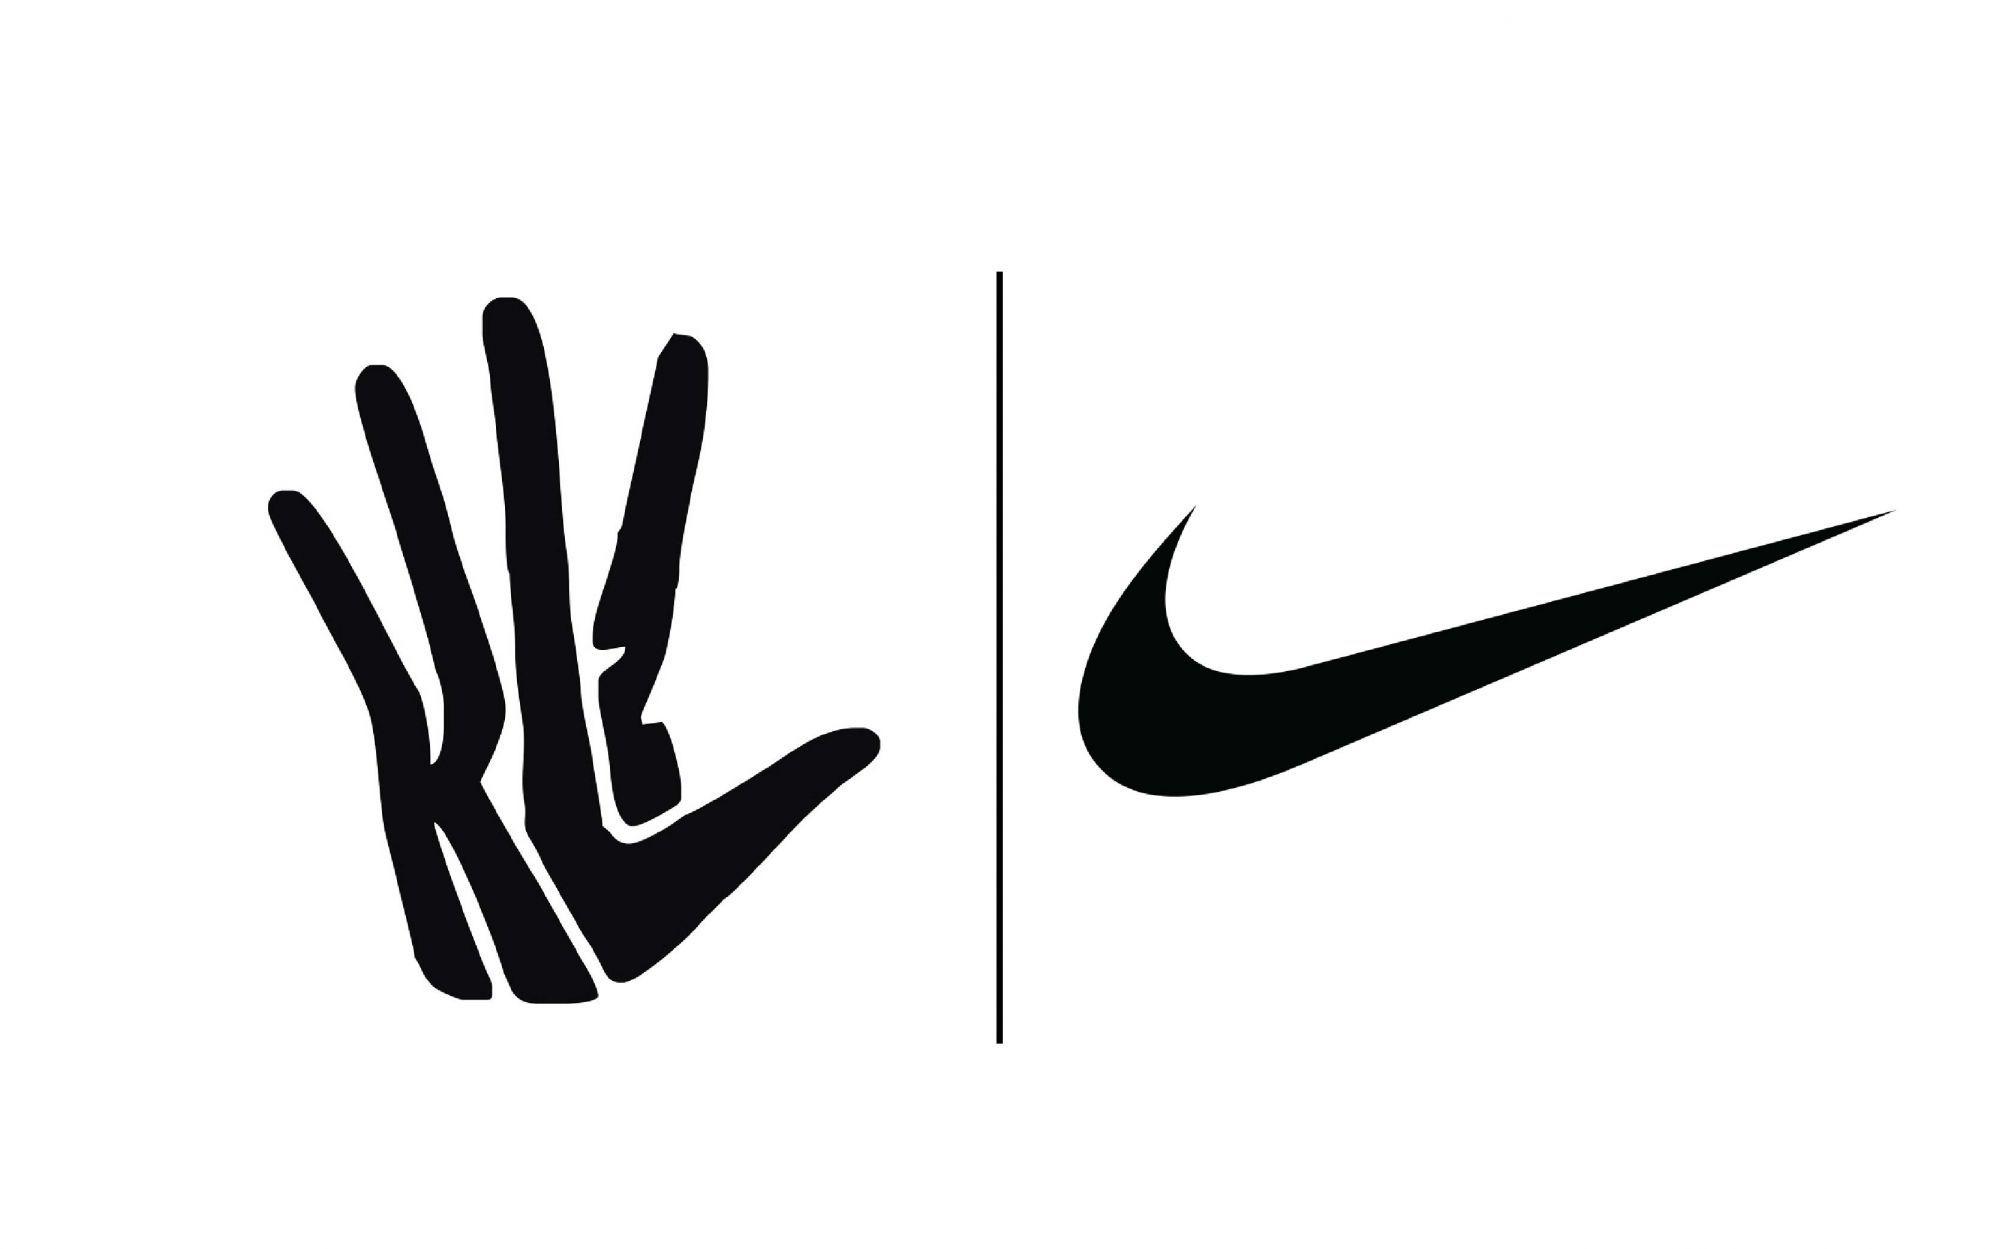 Klaw Logo - Nike filed a countersuit against Kawhi Leonard over the disputed logo ...